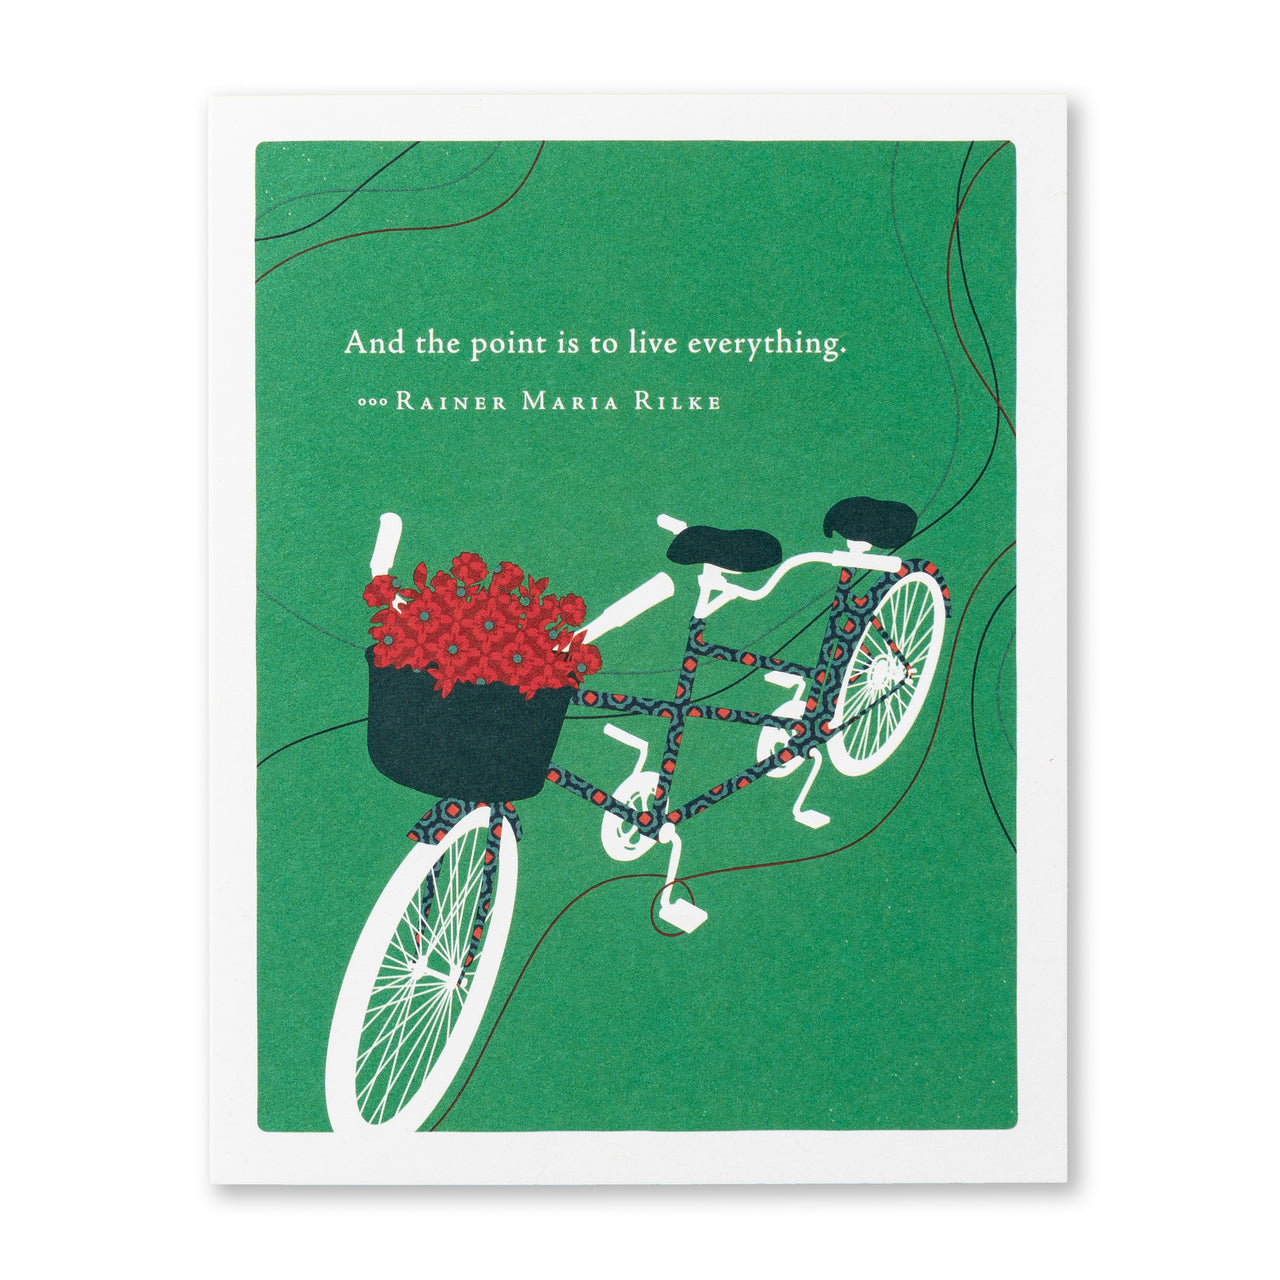 Positively Green Greeting Card - Wedding -  "And The Point is to Live Everything" - Rainer Maria Rilke - Mellow Monkey